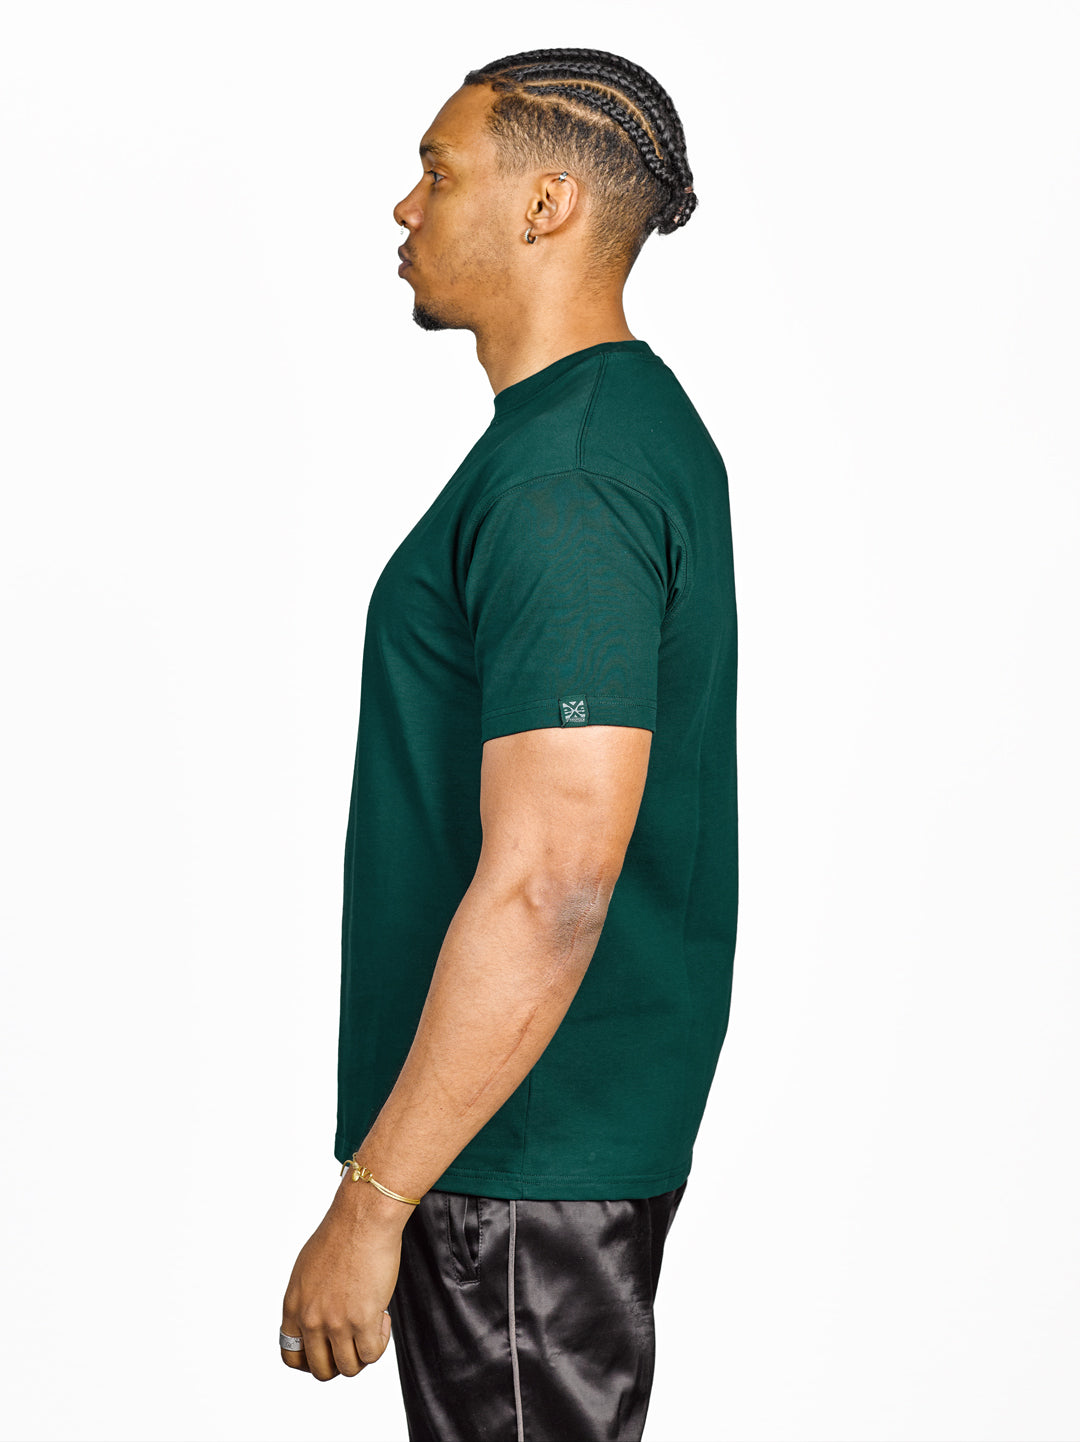 Exetees Regular Round Neck T-Shirt (Green) - exetees.com